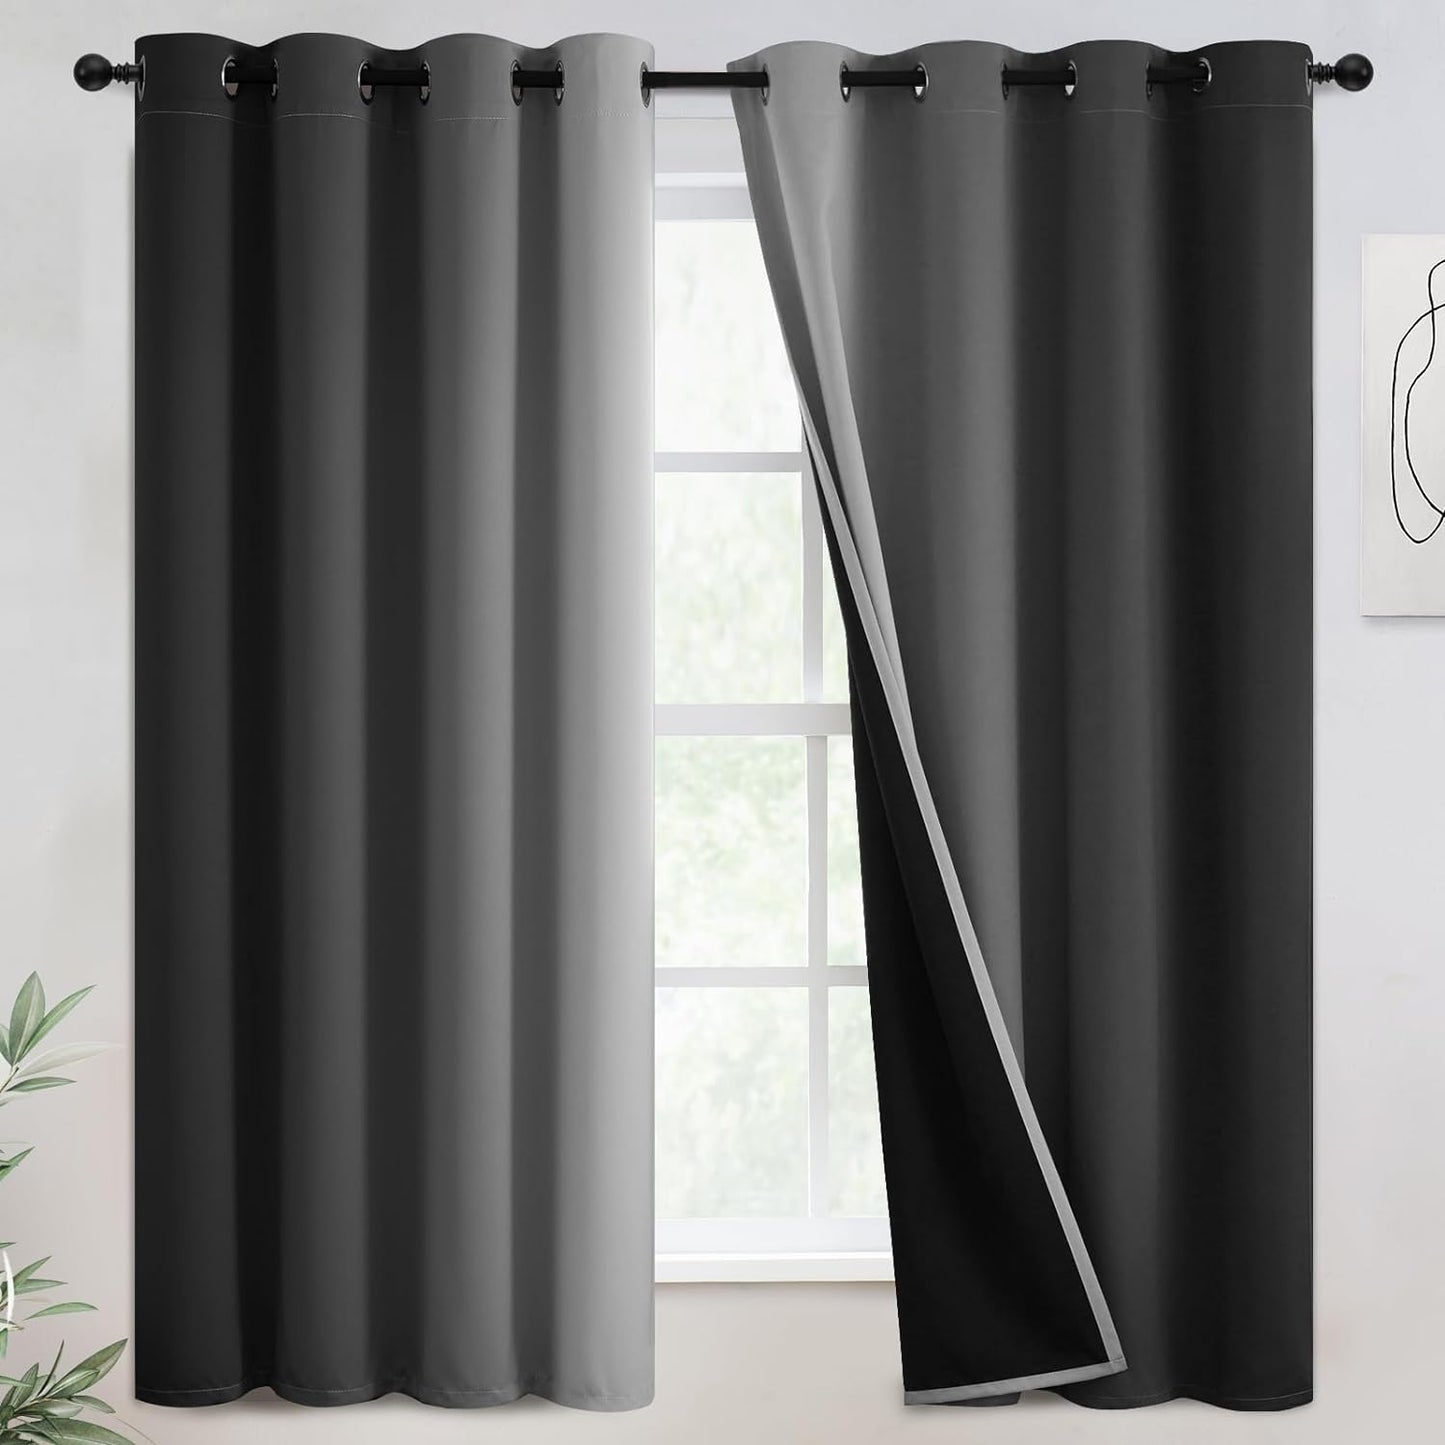 COSVIYA 100% Blackout Curtains & Drapes Ombre Purple Curtains 63 Inch Length 2 Panels,Full Room Darkening Grommet Gradient Insulated Thermal Window Curtains for Bedroom/Living Room,52X63 Inches  COSVIYA Black To Greyish White 52W X 63L 